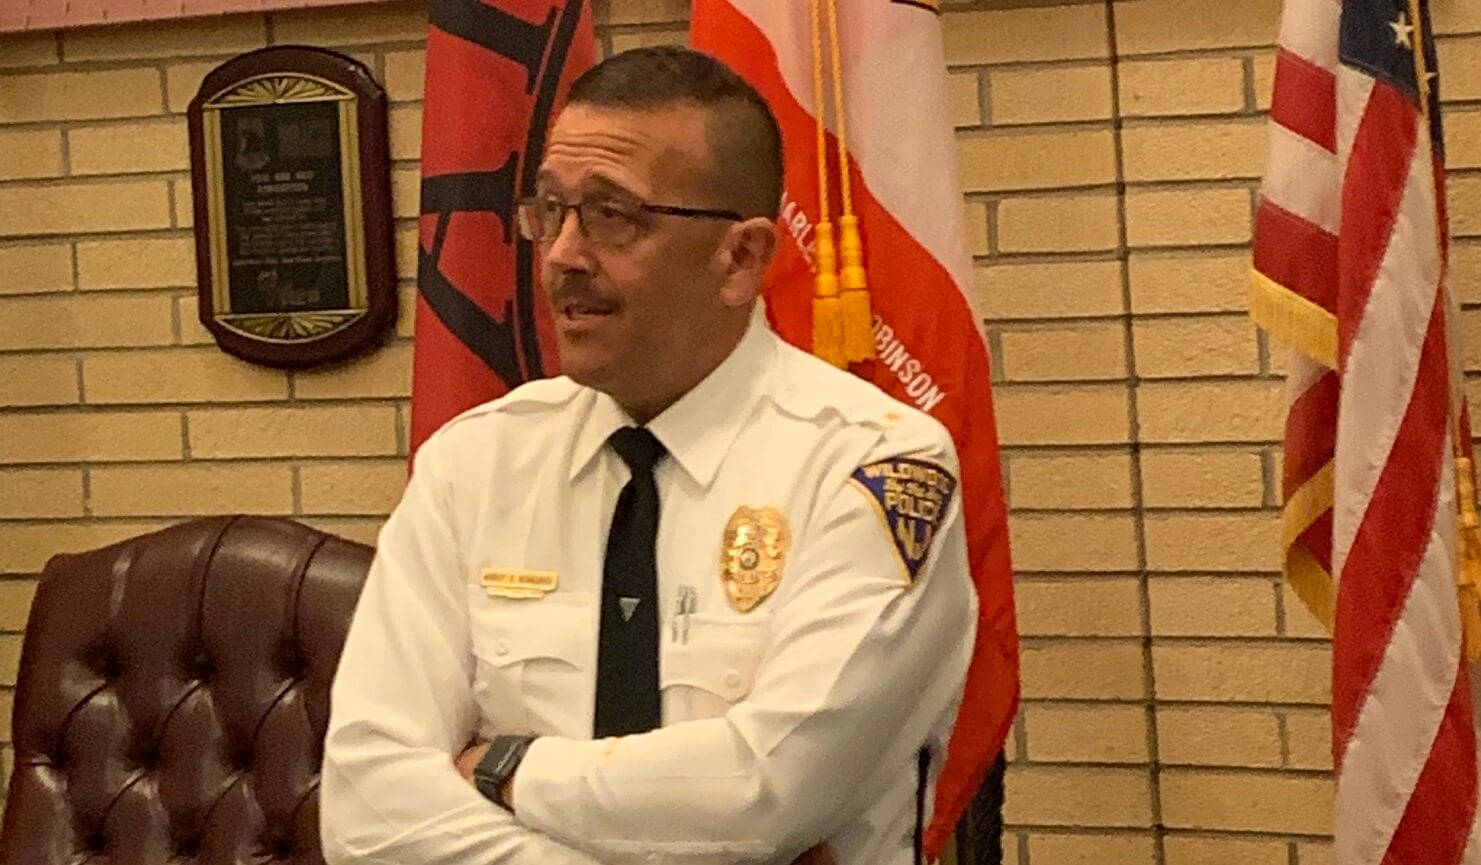 Wildwood Police Chief Robert Regalbuto provides an update on President Donald Trump’s visit during the Jan. 22 Wildwood Board of Commissioners meeting.  